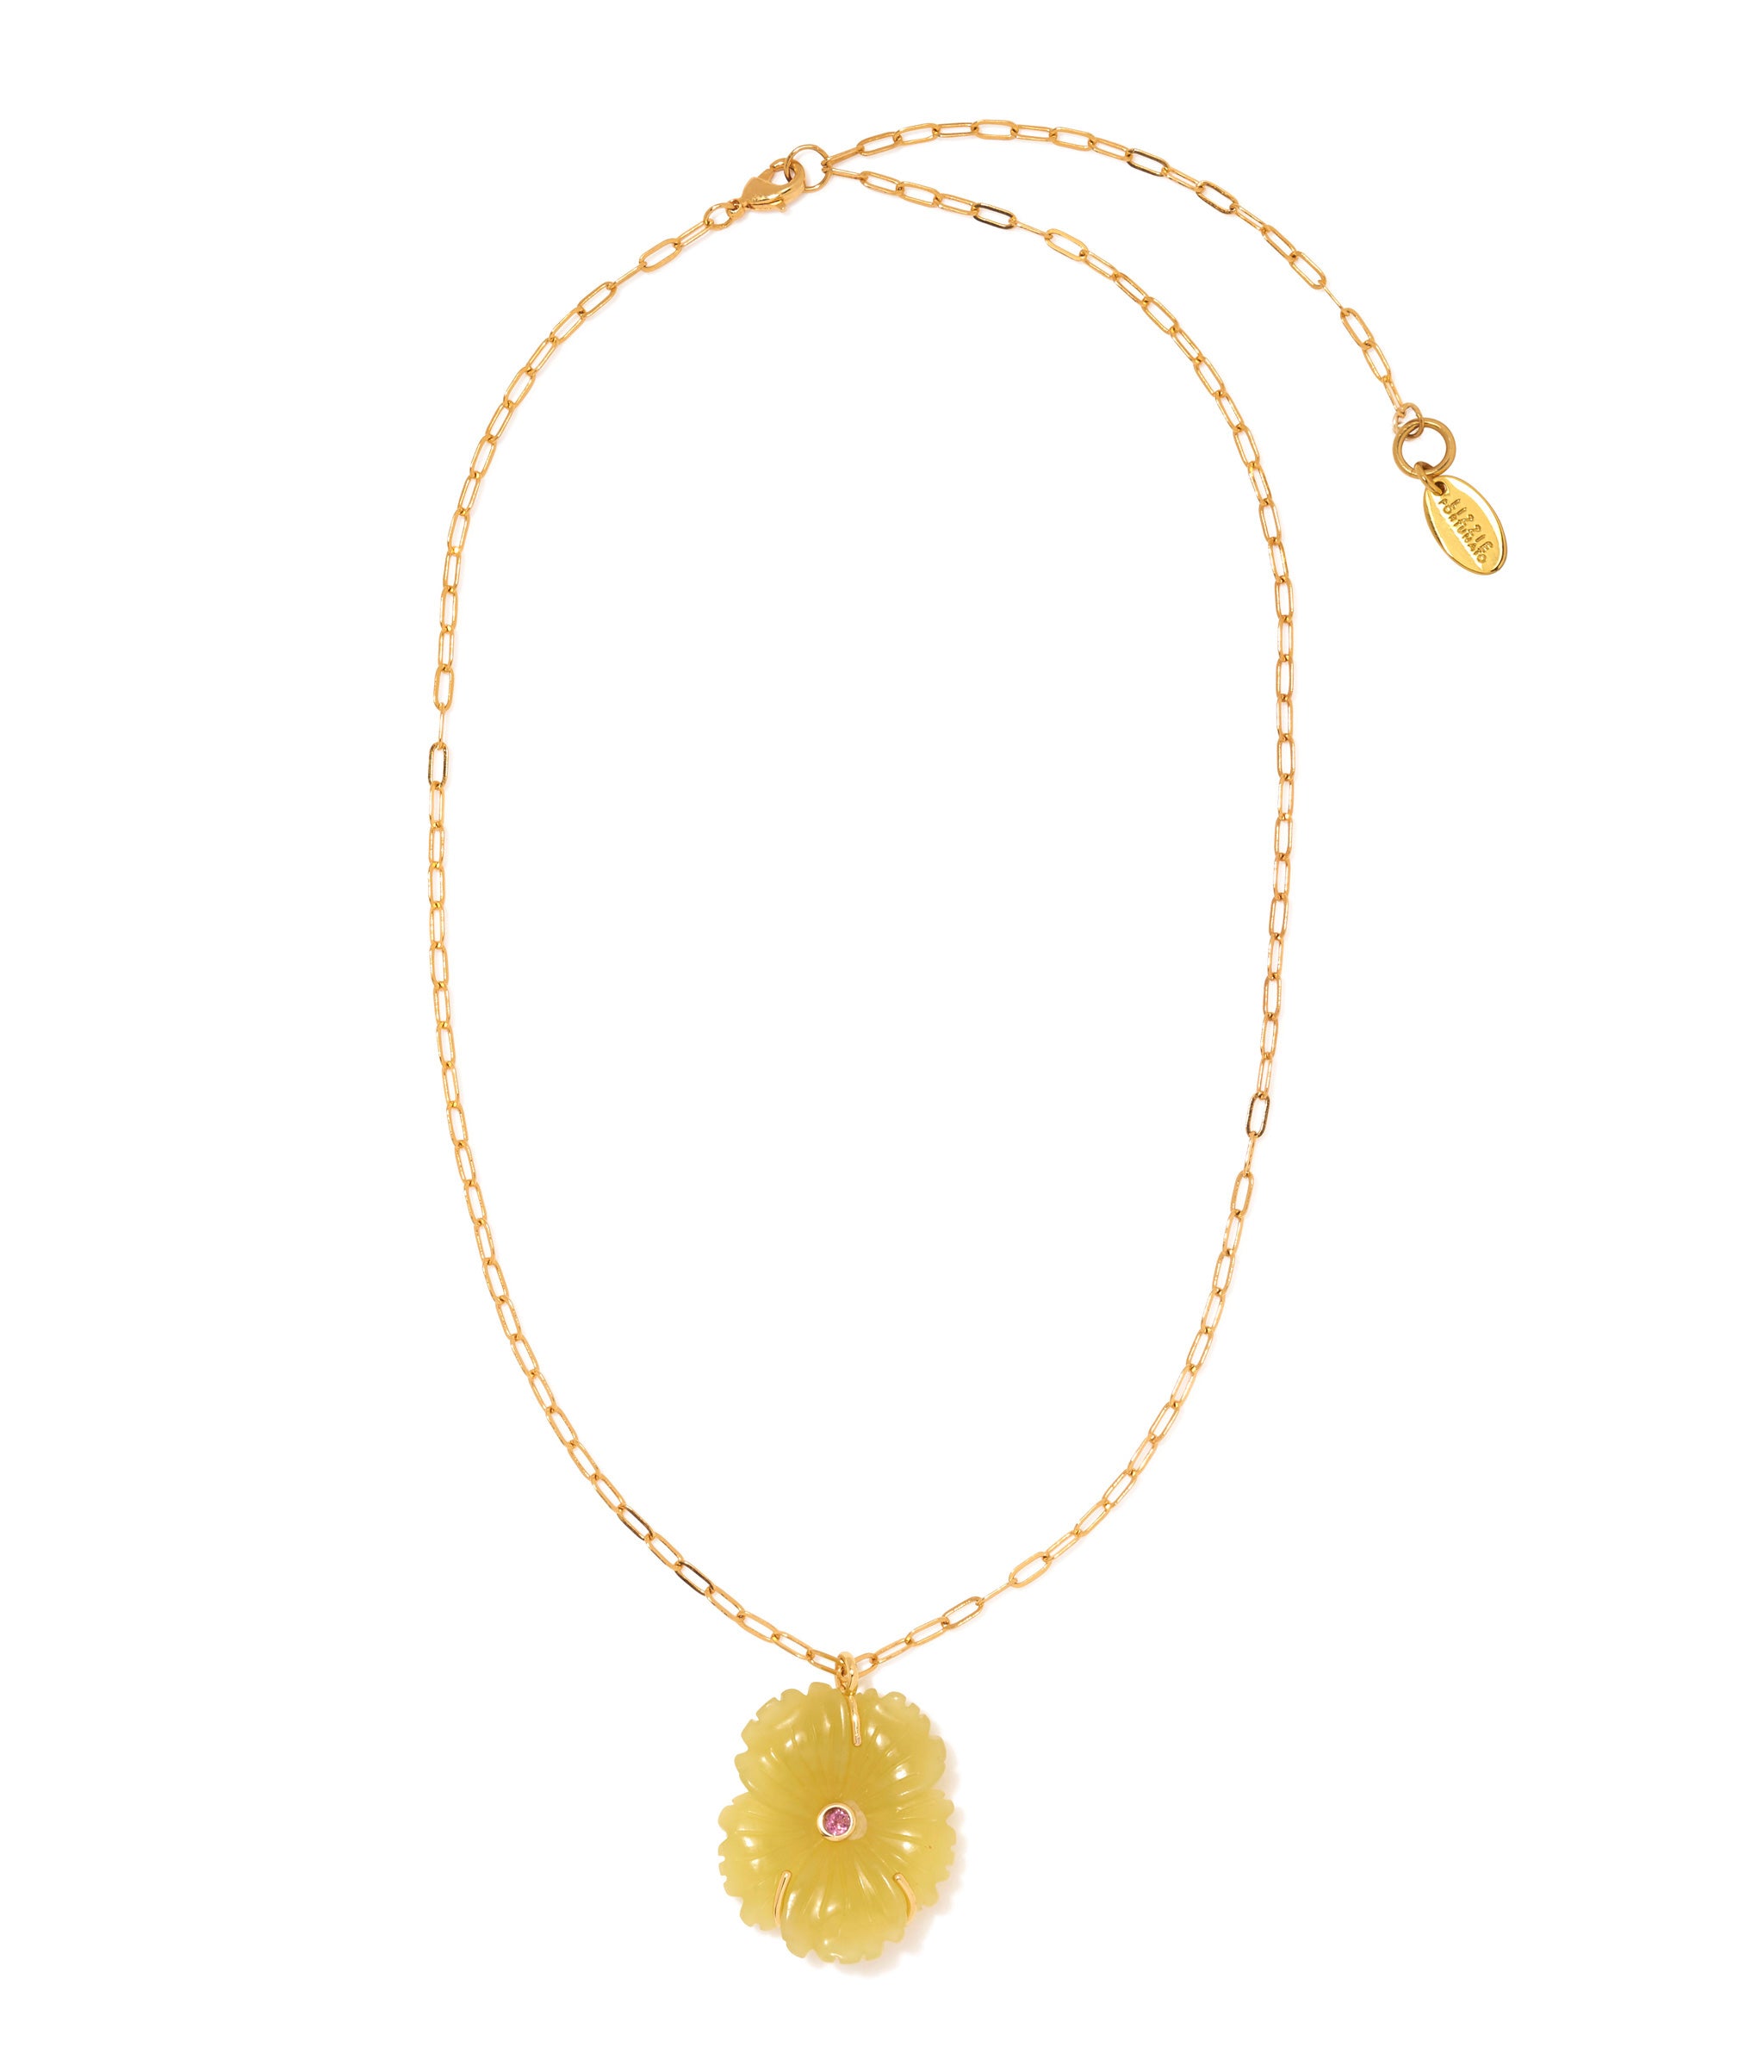 New Bloom Necklace in Canary. Gold-plated brass papaerclip chain necklace with carved jade flower pendant with rhodolite